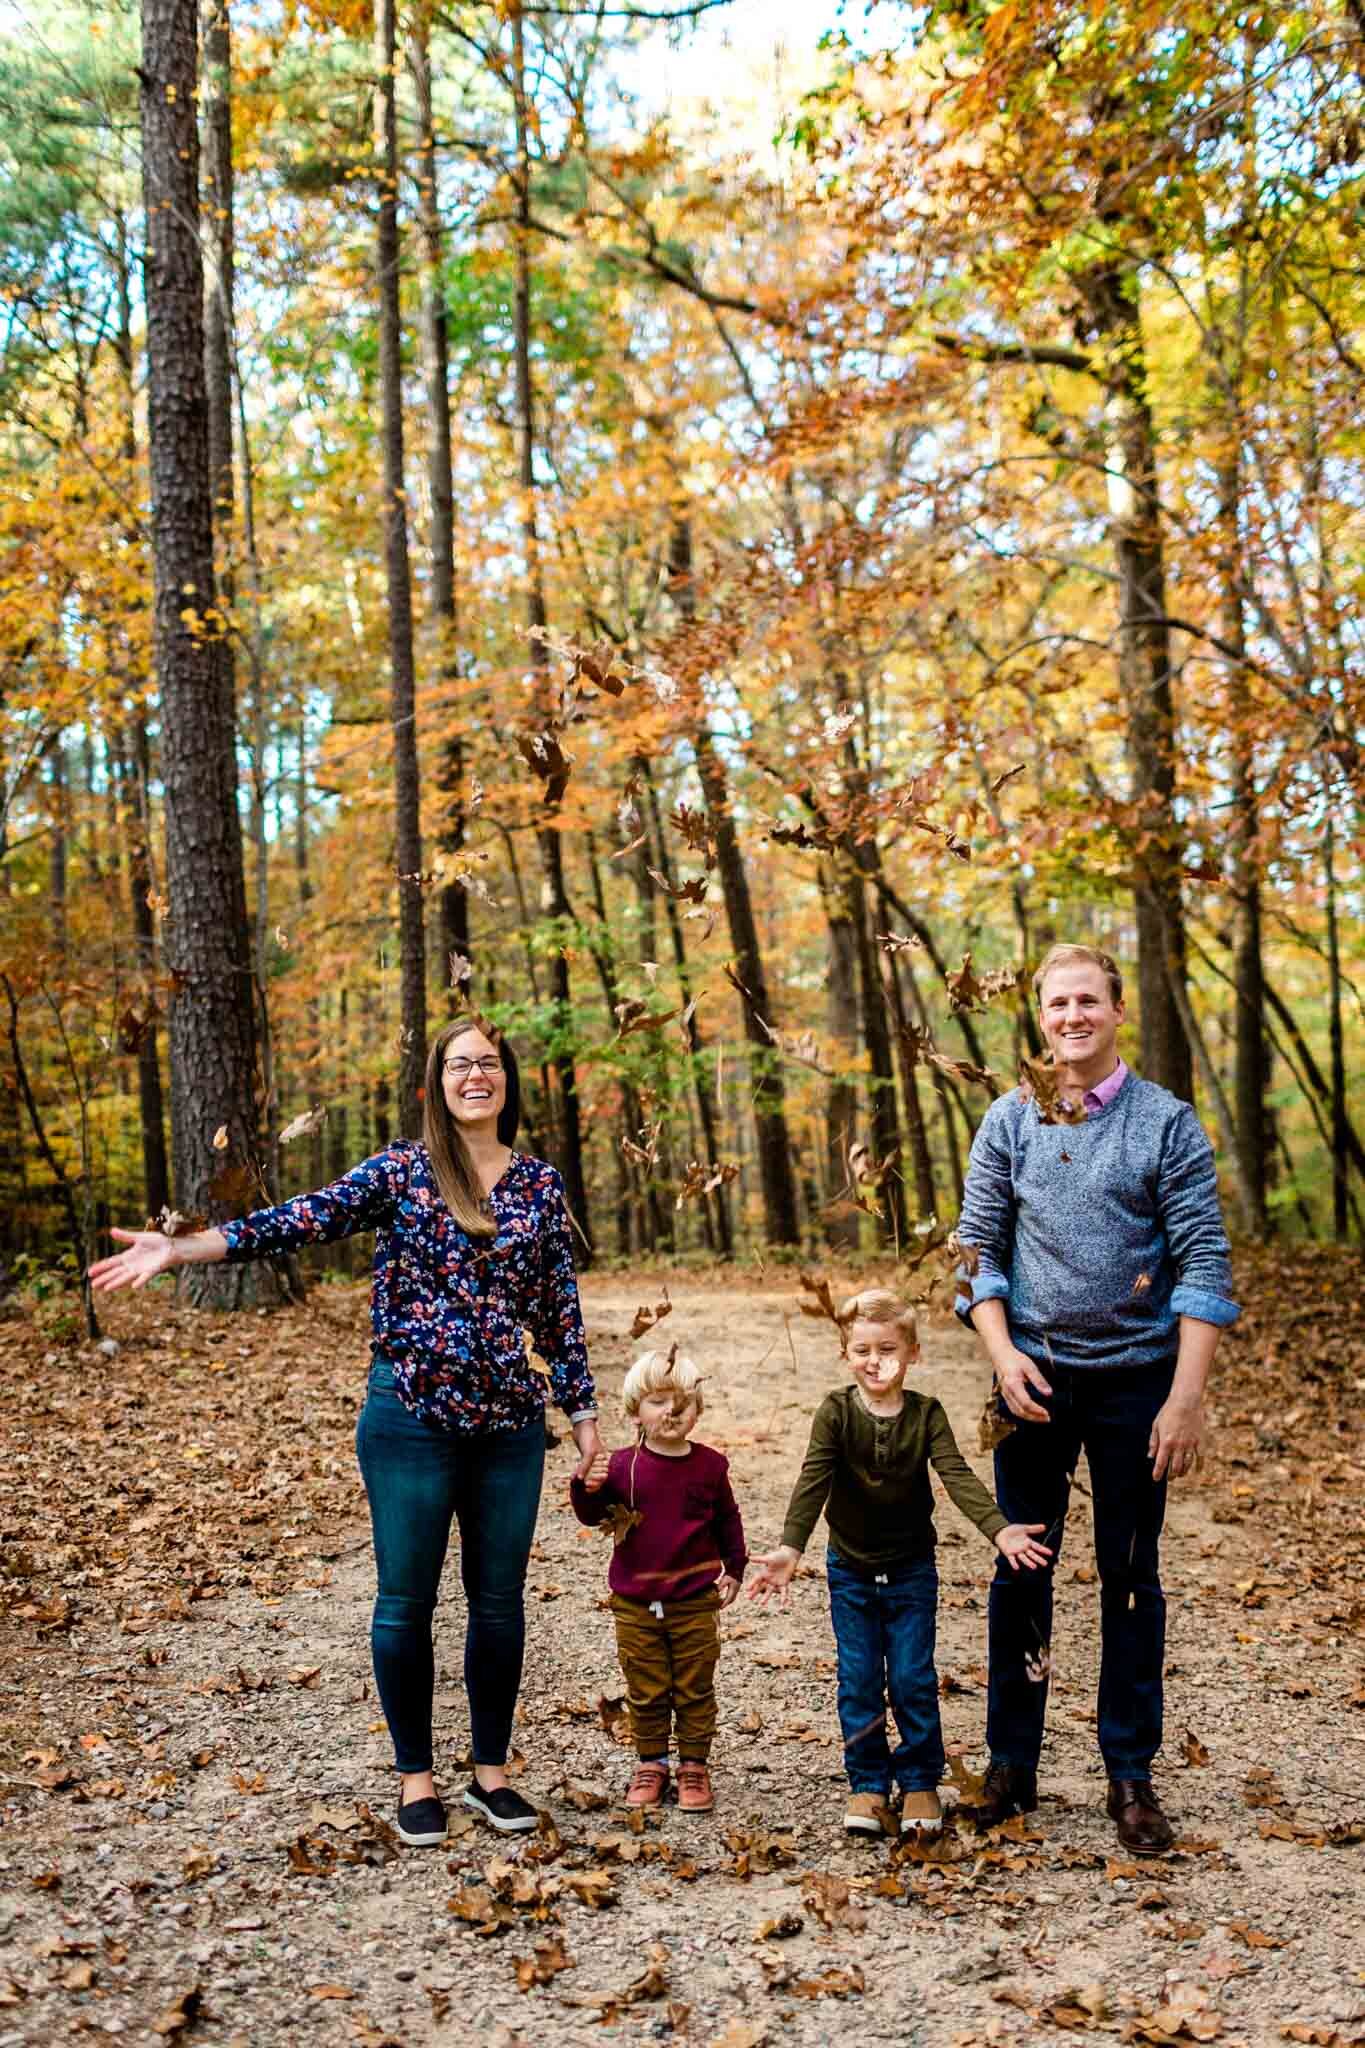 Raleigh Family Photographer at Umstead Park | By G. Lin Photography | Family tossing leaves in the air